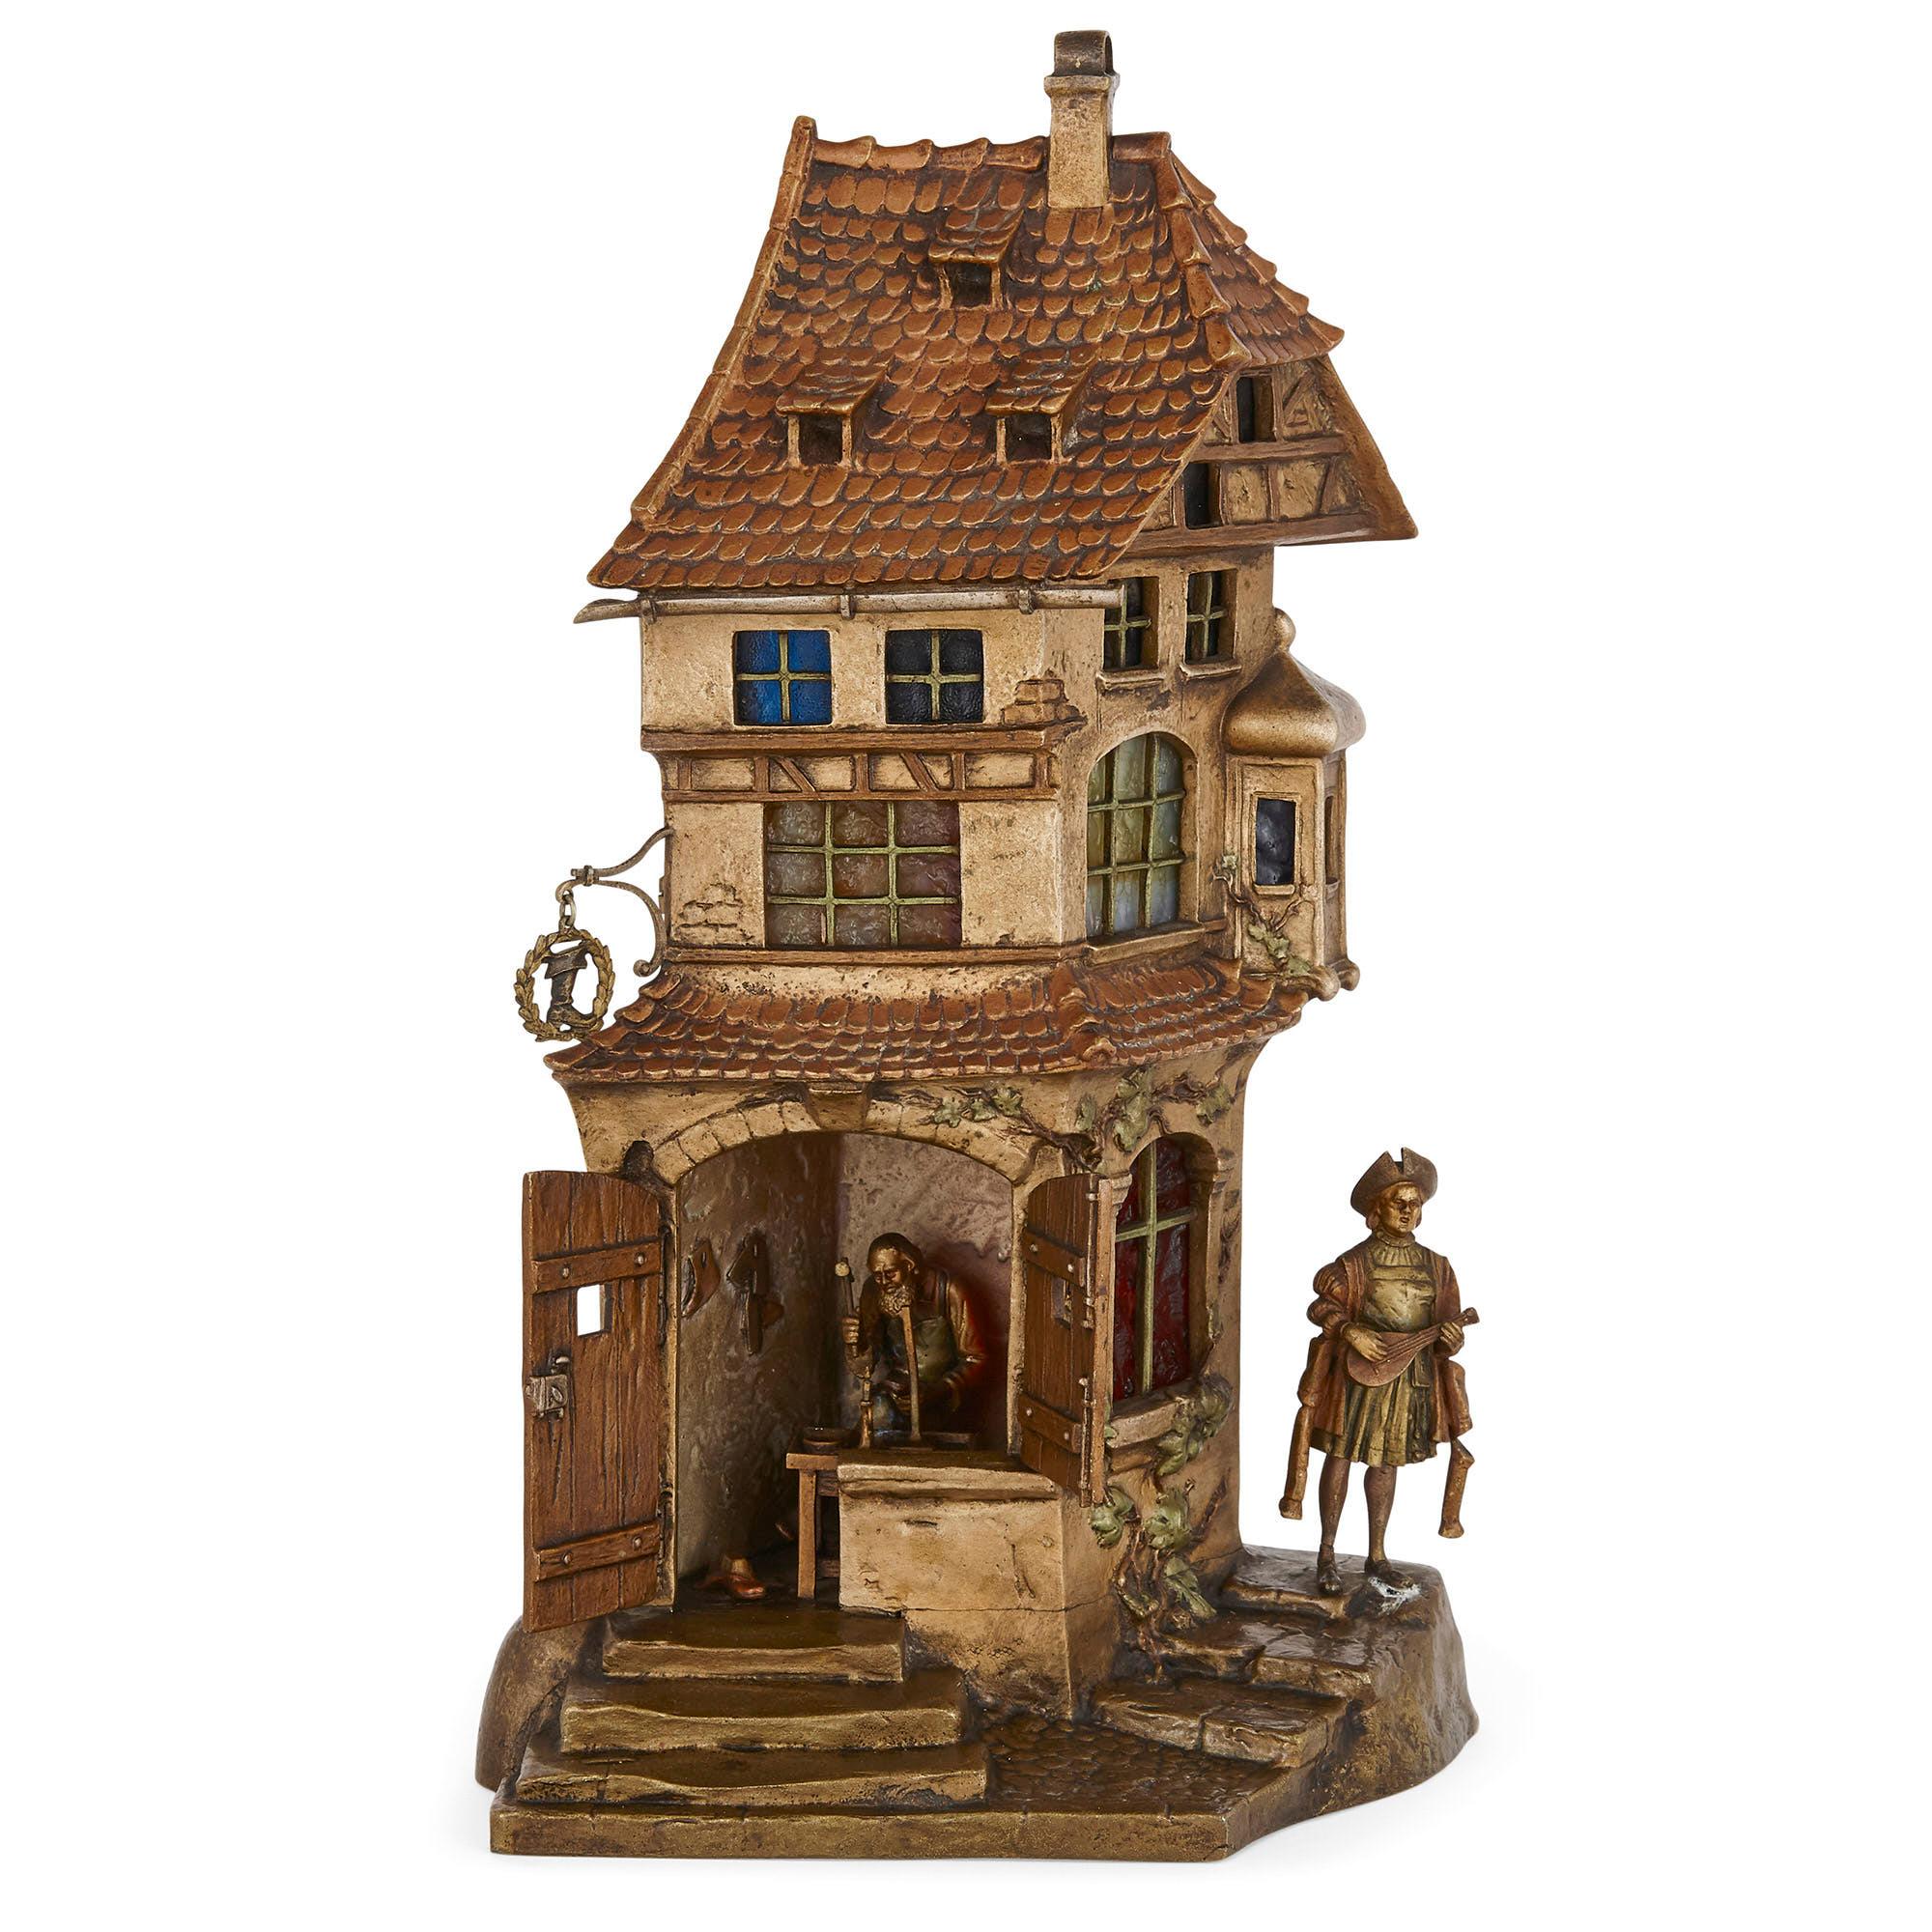 Bronze lamp in the form of a townhouse by Bergman
Austrian, circa 1900
Measures: Height 30m, width 17cm, depth 10cm

This delightful cold-painted bronze lamp was crafted by the famous Viennese foundry owner, Franz Xavier Bergman. Franz Xavier